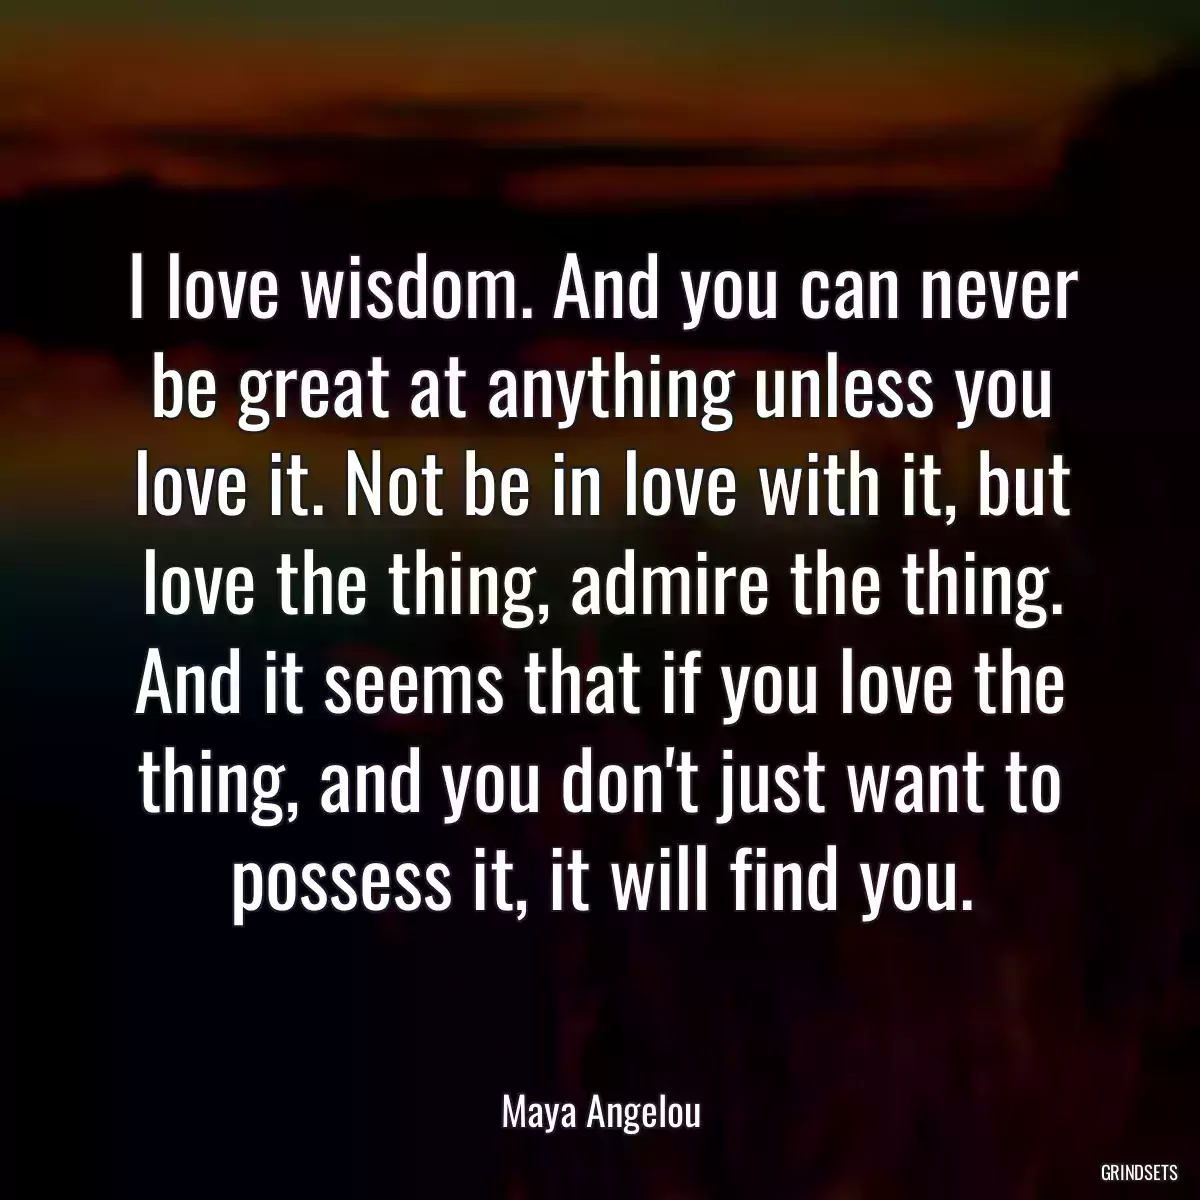 I love wisdom. And you can never be great at anything unless you love it. Not be in love with it, but love the thing, admire the thing. And it seems that if you love the thing, and you don\'t just want to possess it, it will find you.